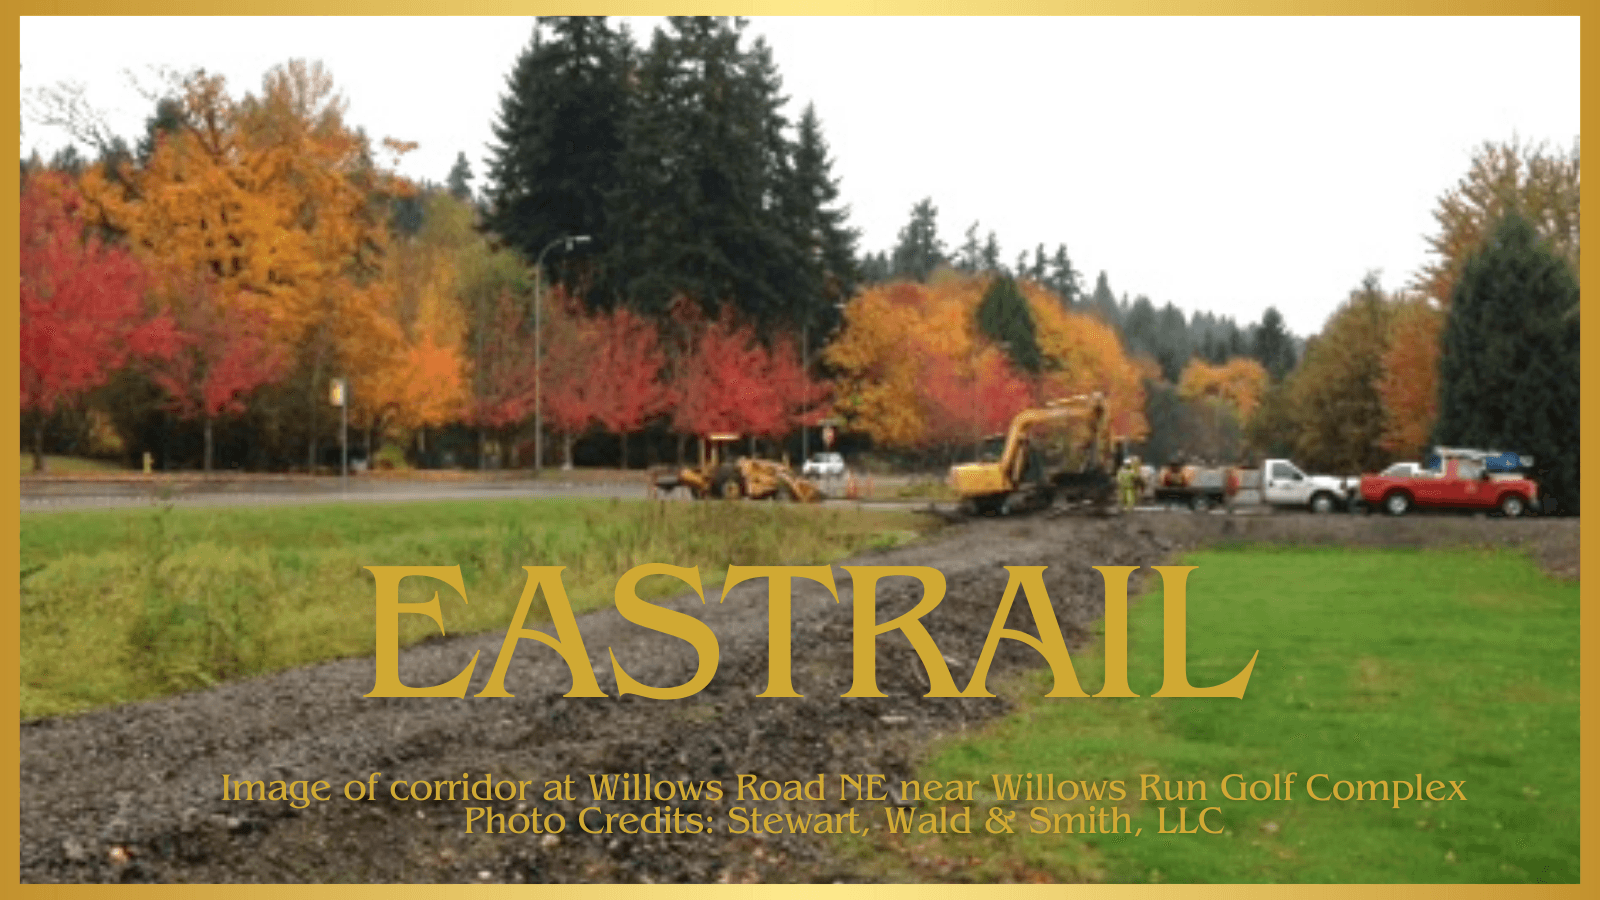 The Story of the Eastrail